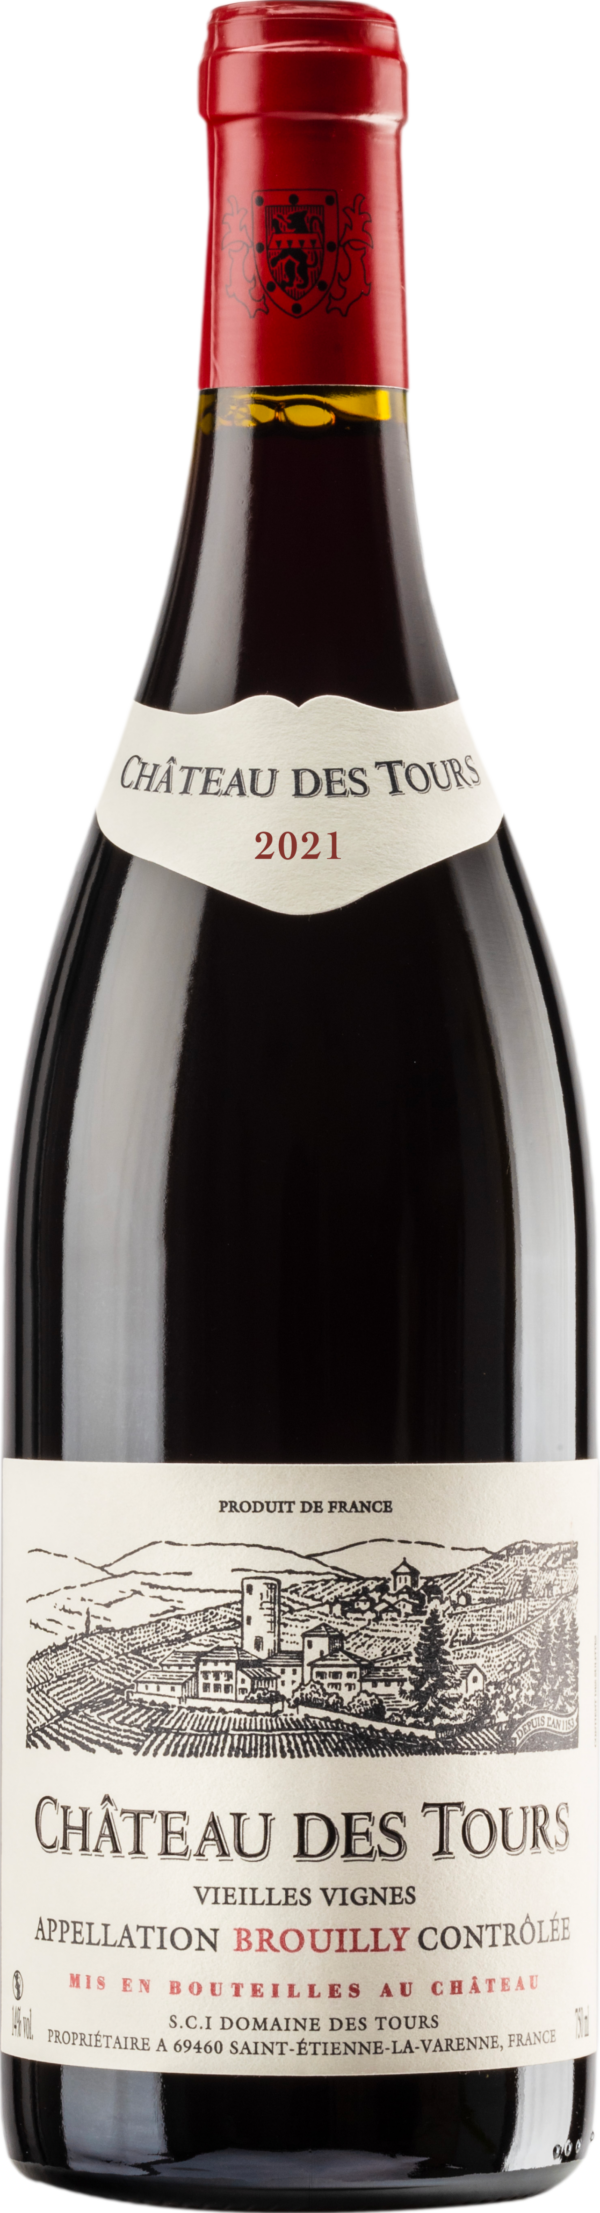 Product image of Chateau des Tours Brouilly Vieilles Vignes 2021 from 8wines